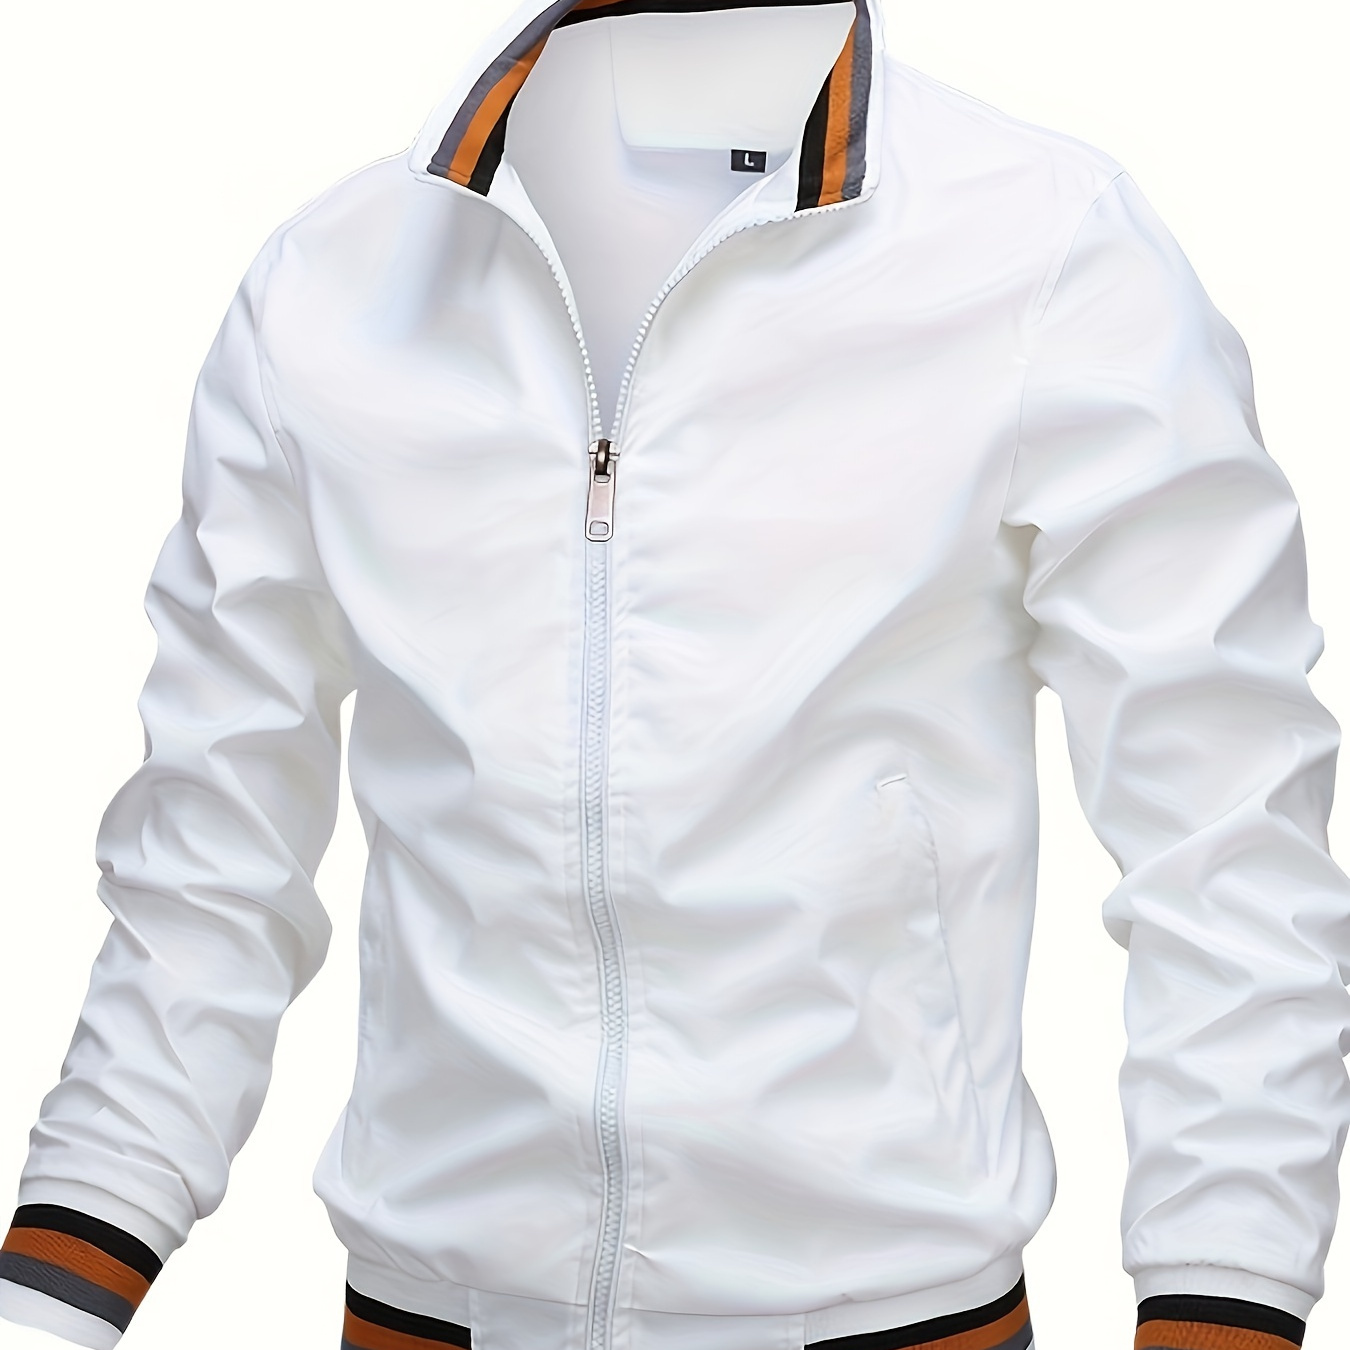 

Men's Stripe Pattern Long Sleeve Zipper Down Stand Collar Jacket, Chic And Trendy Regular Fit Windbreaker Jacket For Spring And Autumn Outdoors And Sports Wear